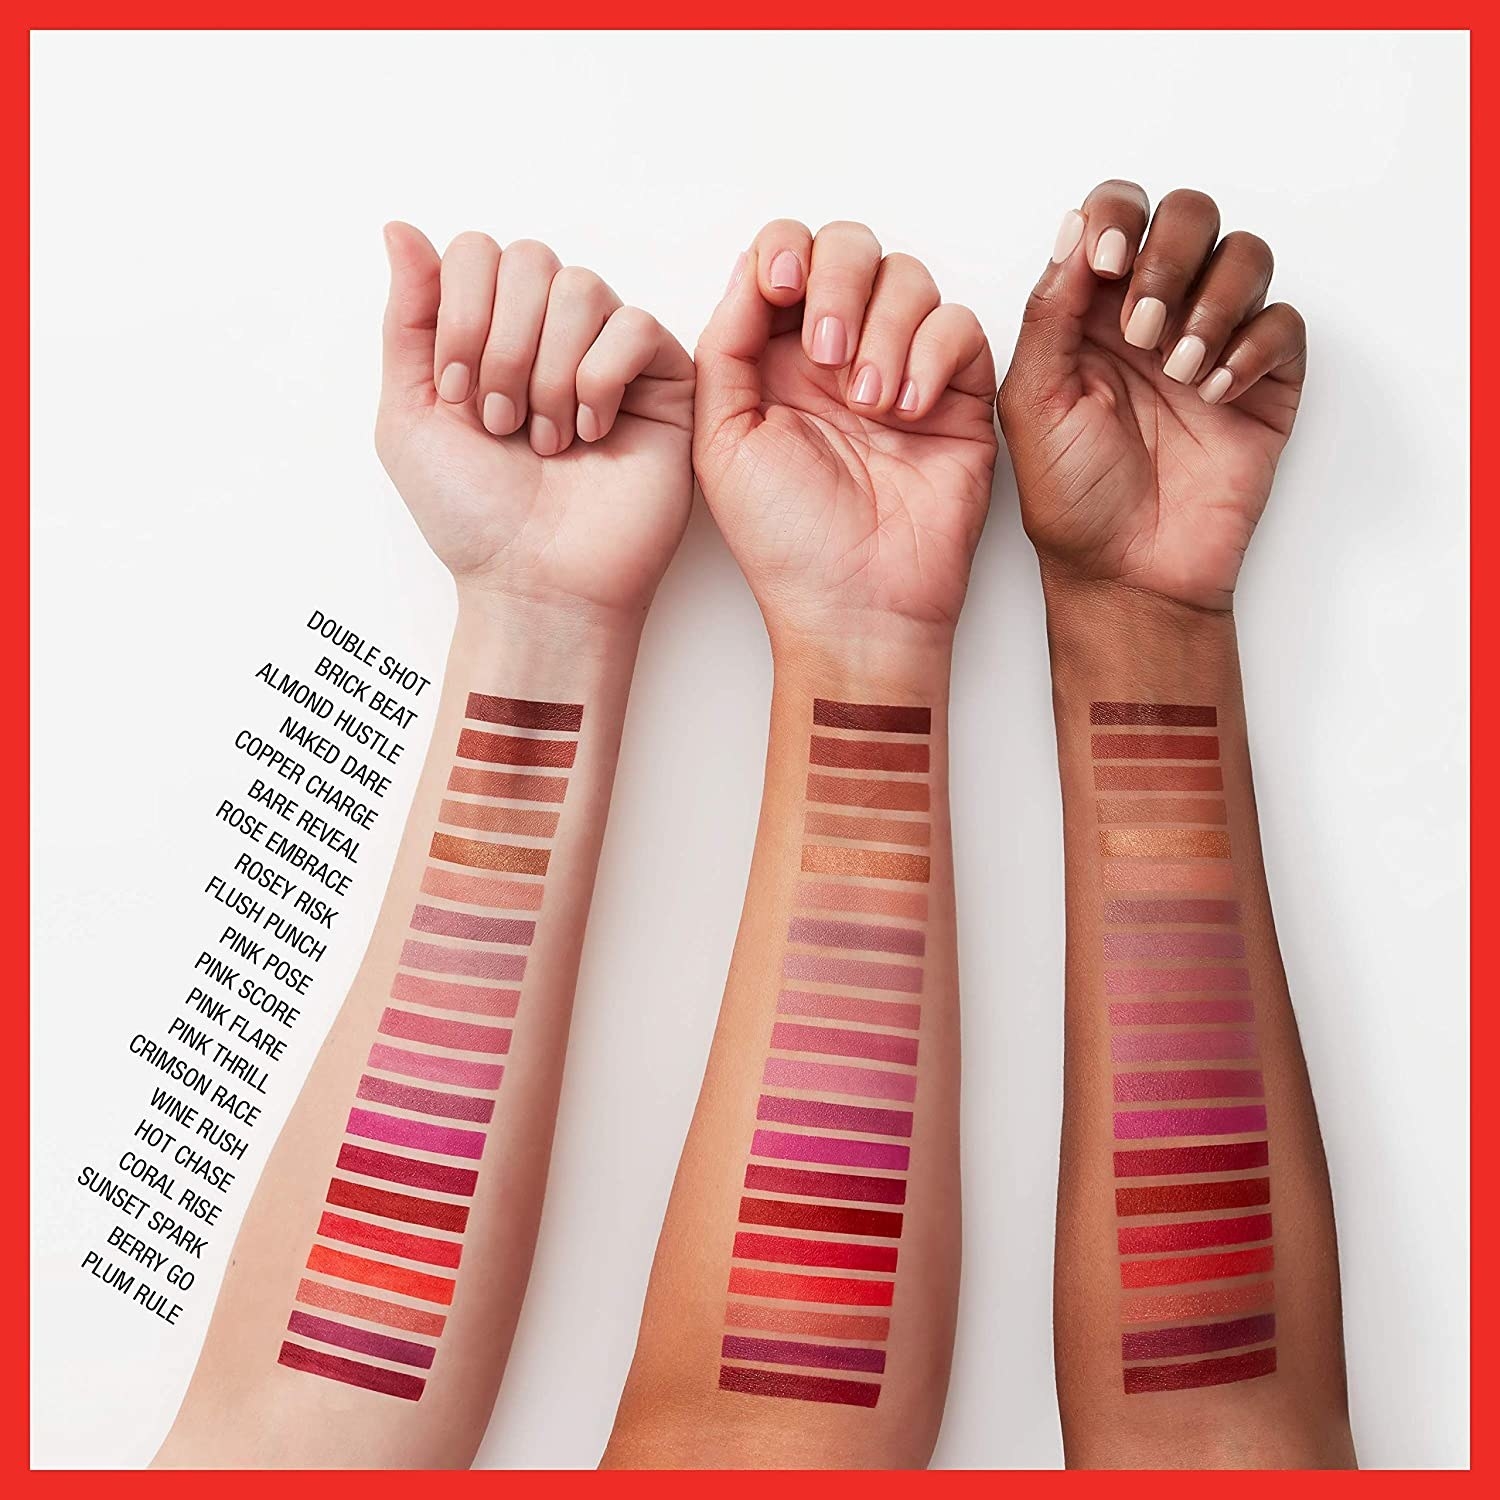 Swatches of 20 of the shades on three arms with different skintones